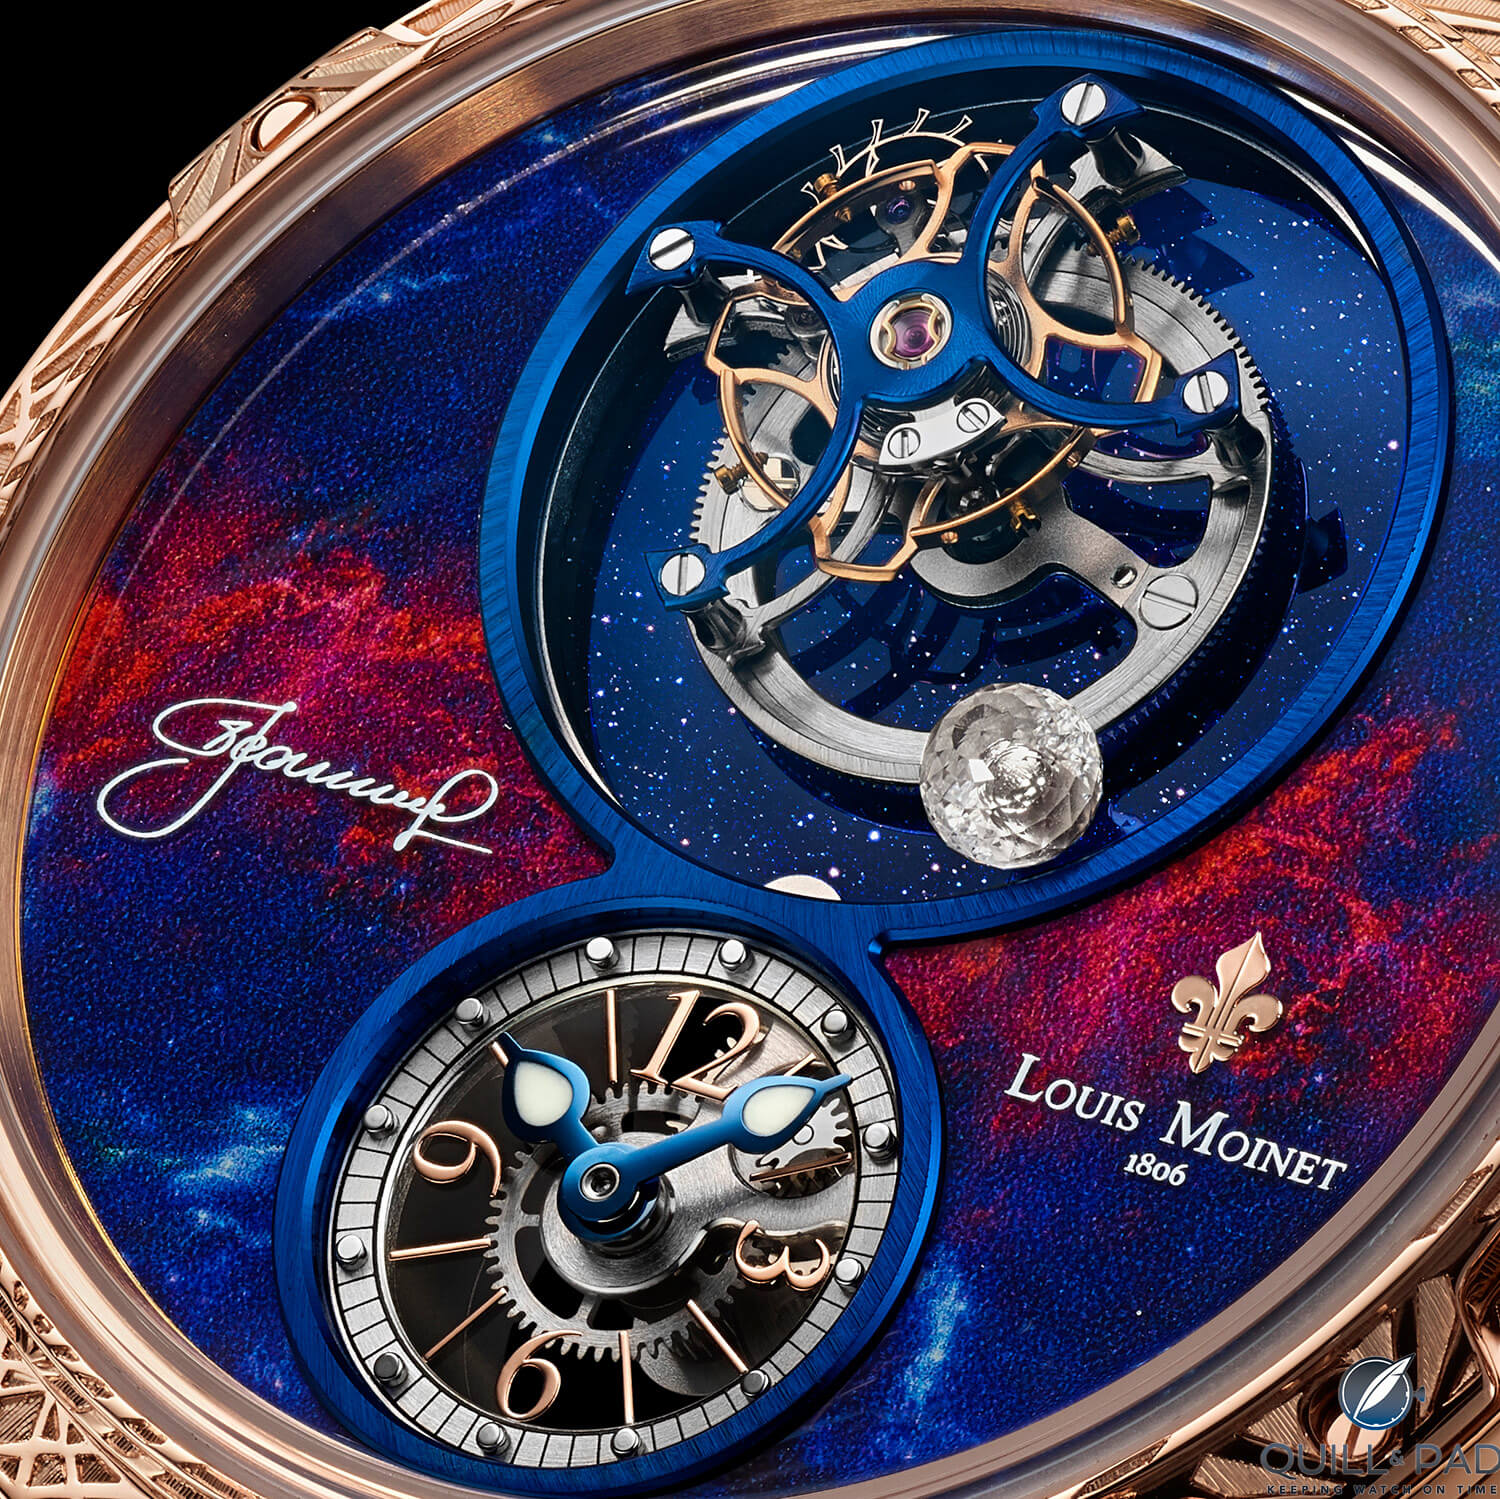 Simply sensational astronomically-themed dial of the Louis Moinet Spacewalker